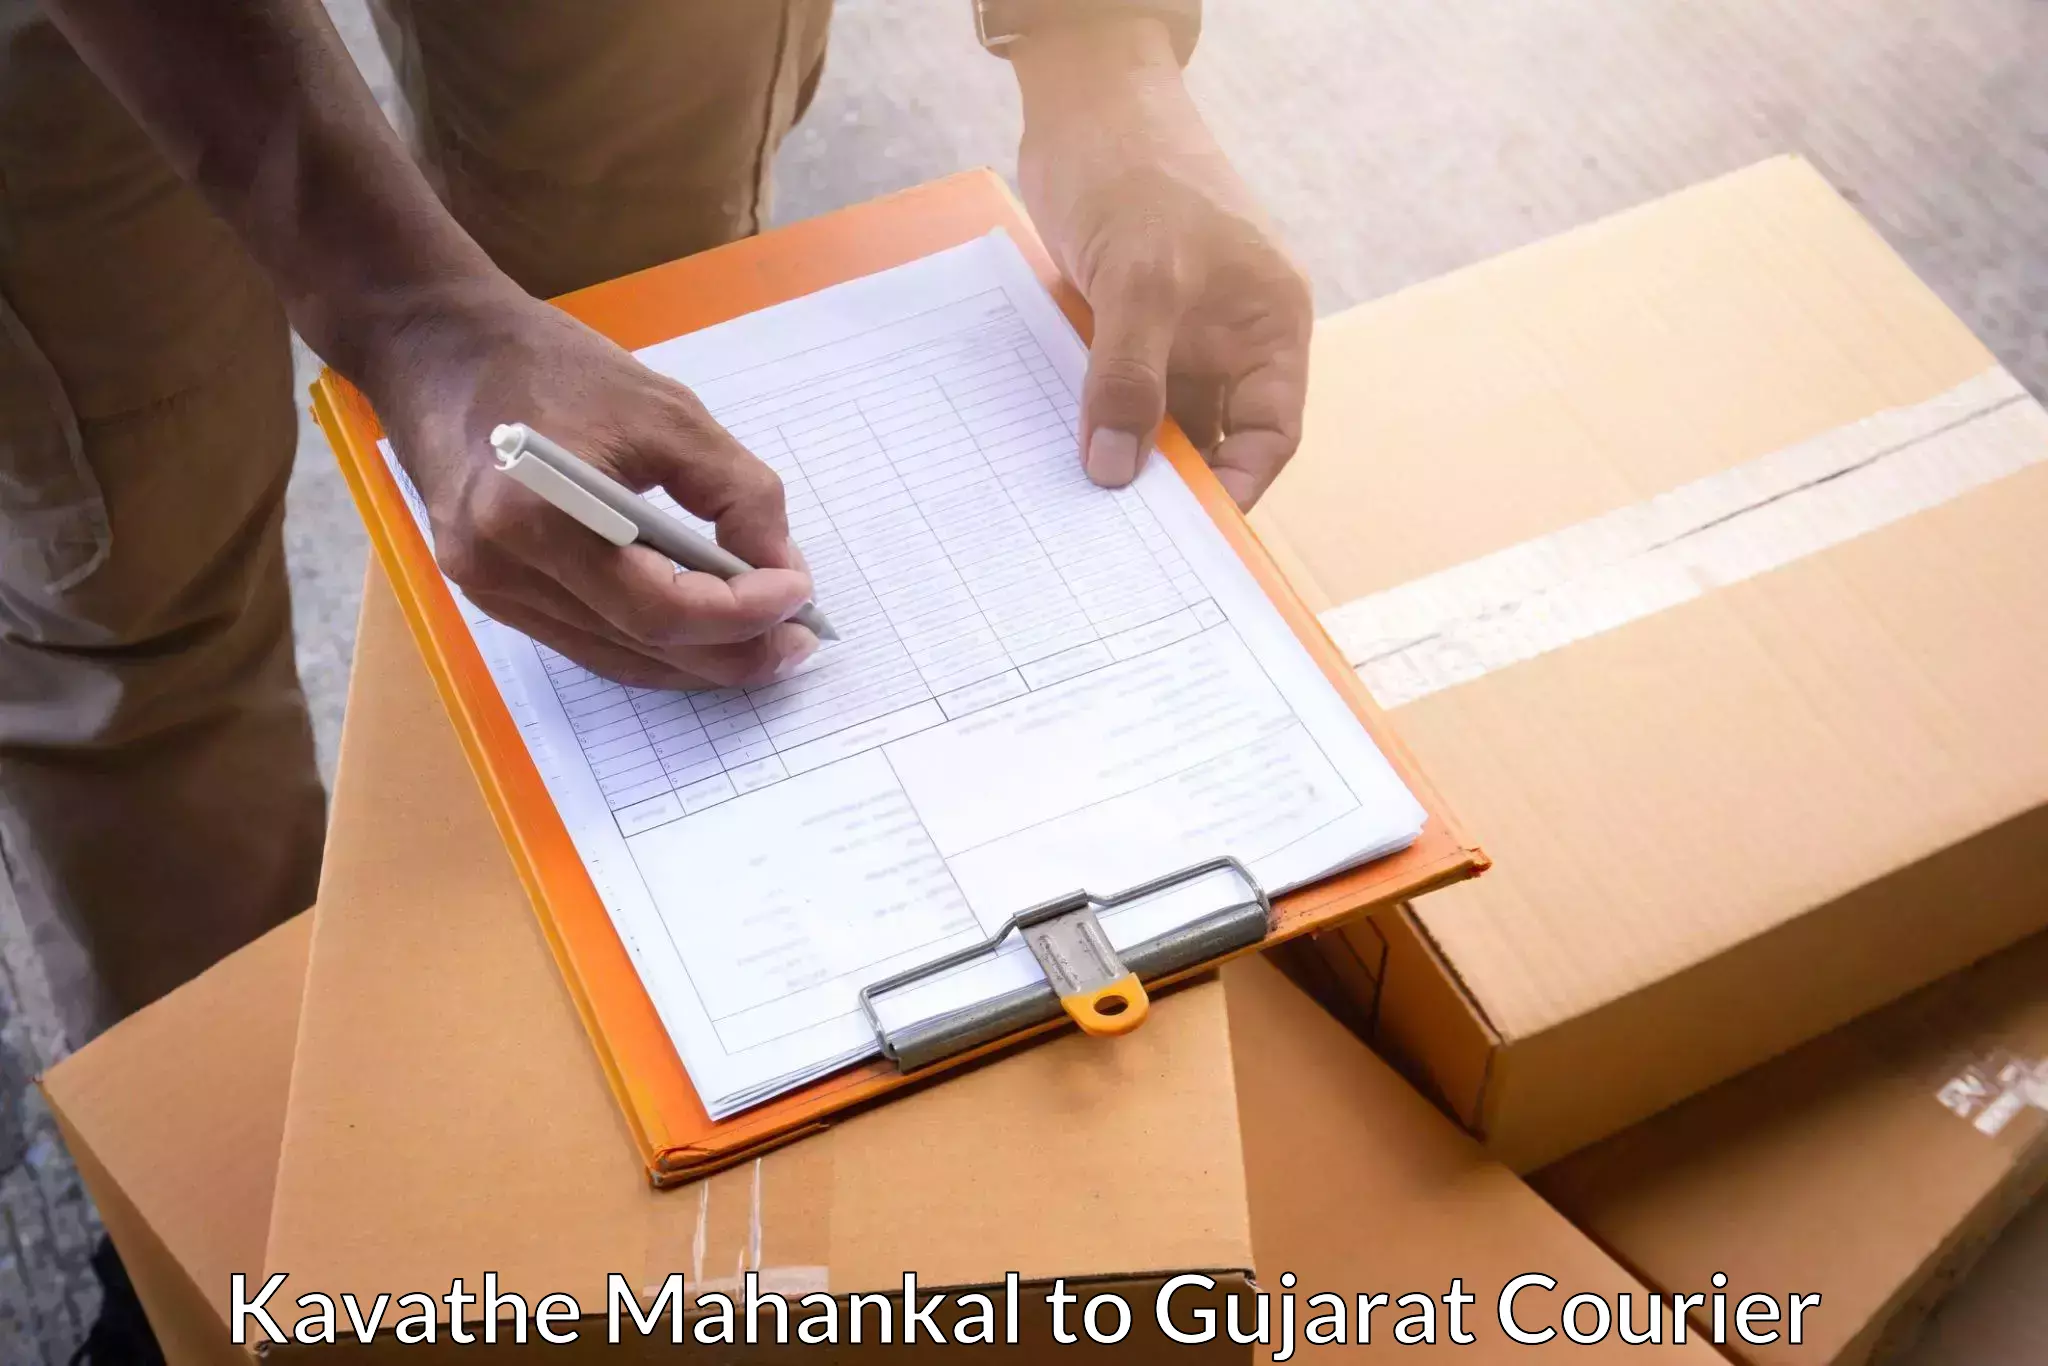 Secure freight services in Kavathe Mahankal to Bhuj